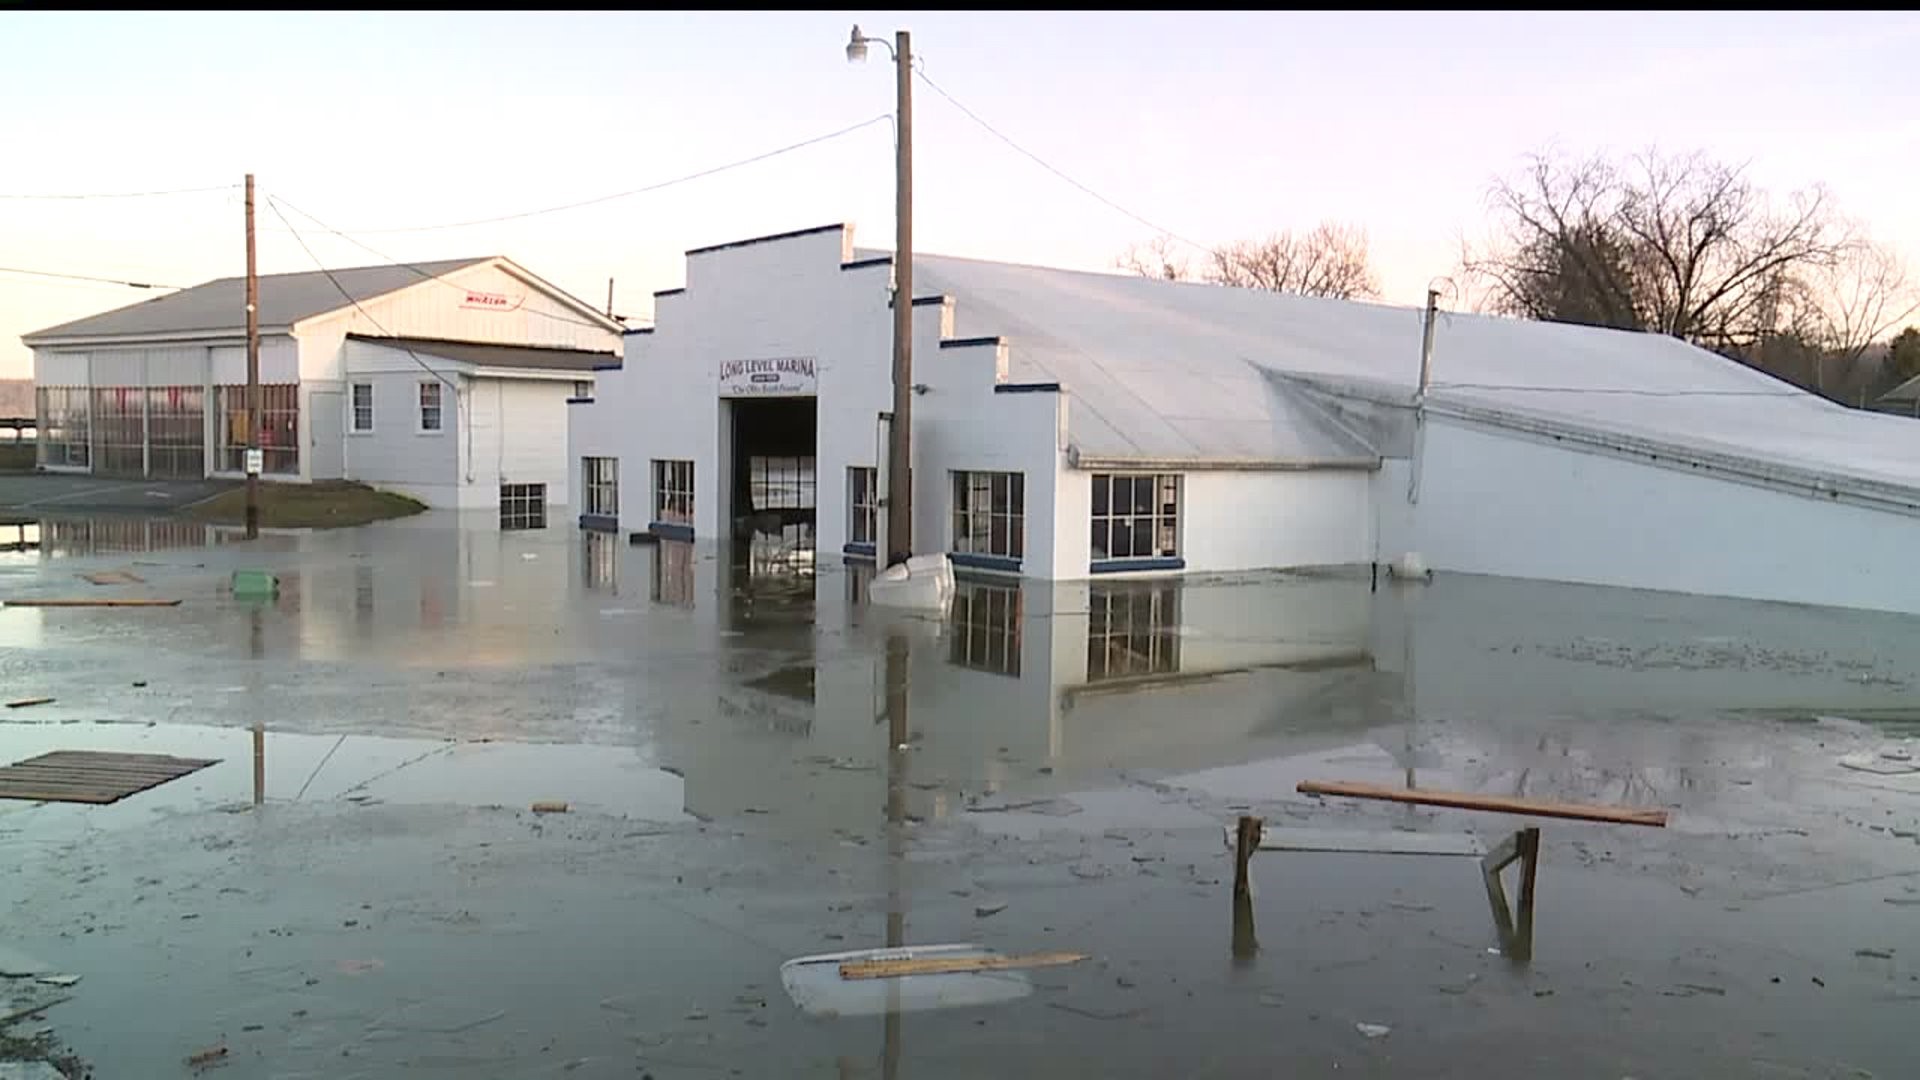 Neighbors and business owners concerned about Susquehanna River conditions in York County